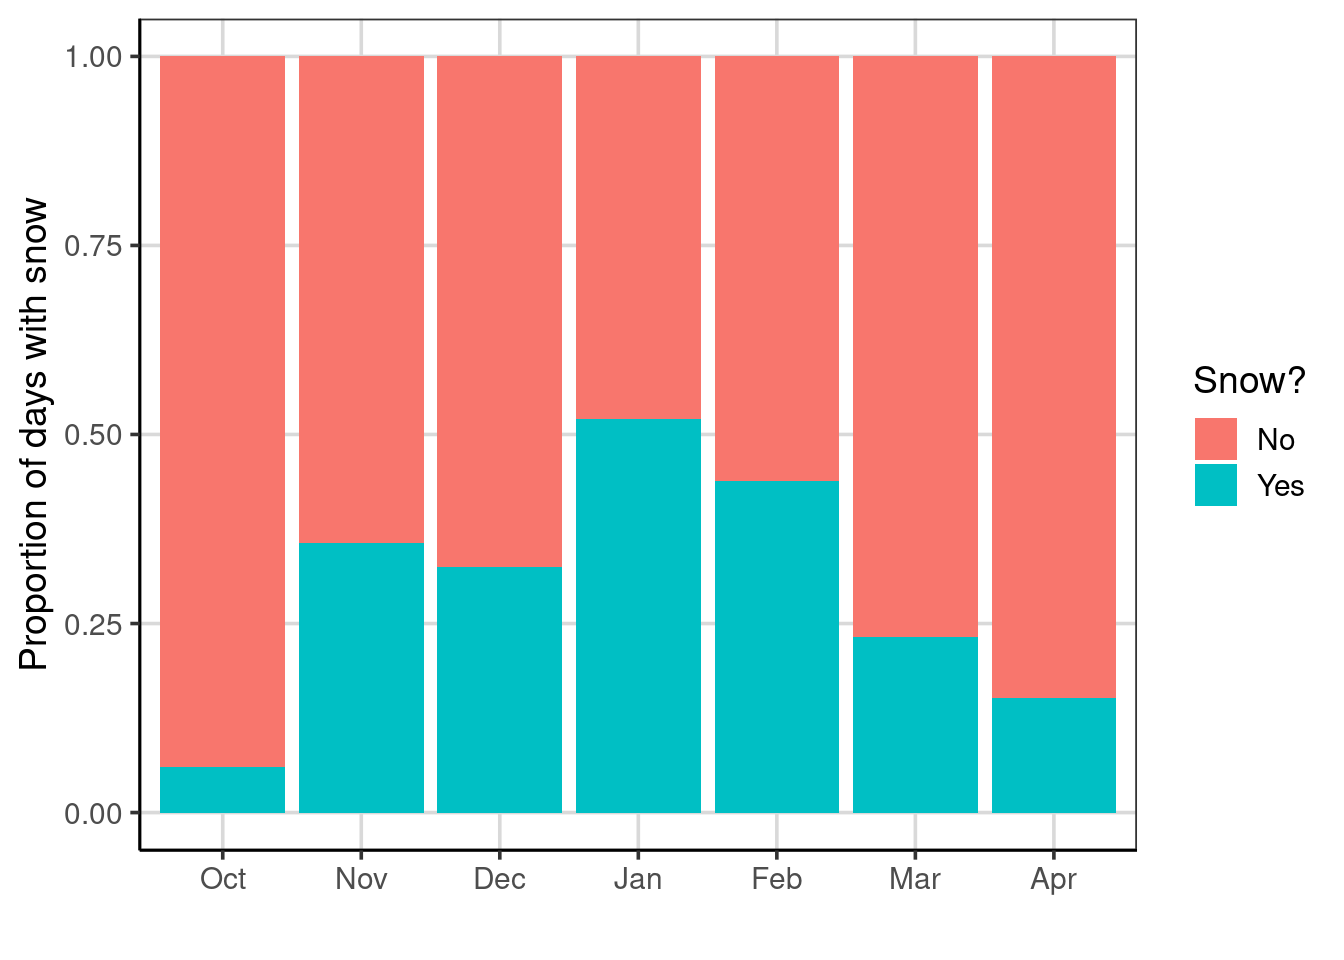 Bar chart showing the proportion of days that is snows across months